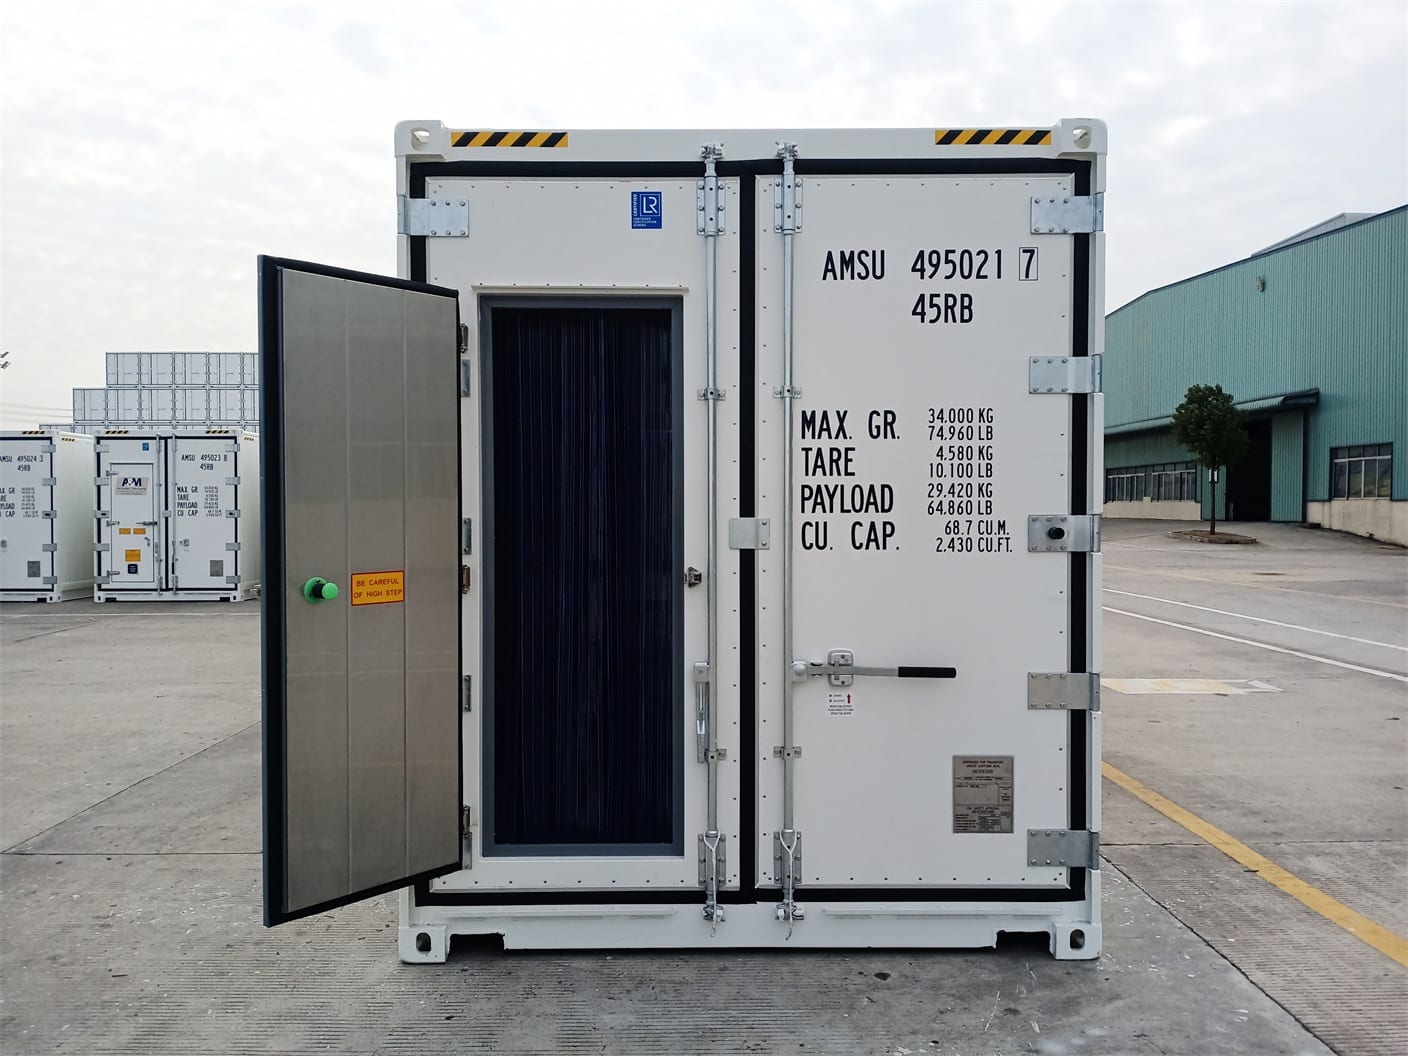 Safety door open on refrigerated storage container